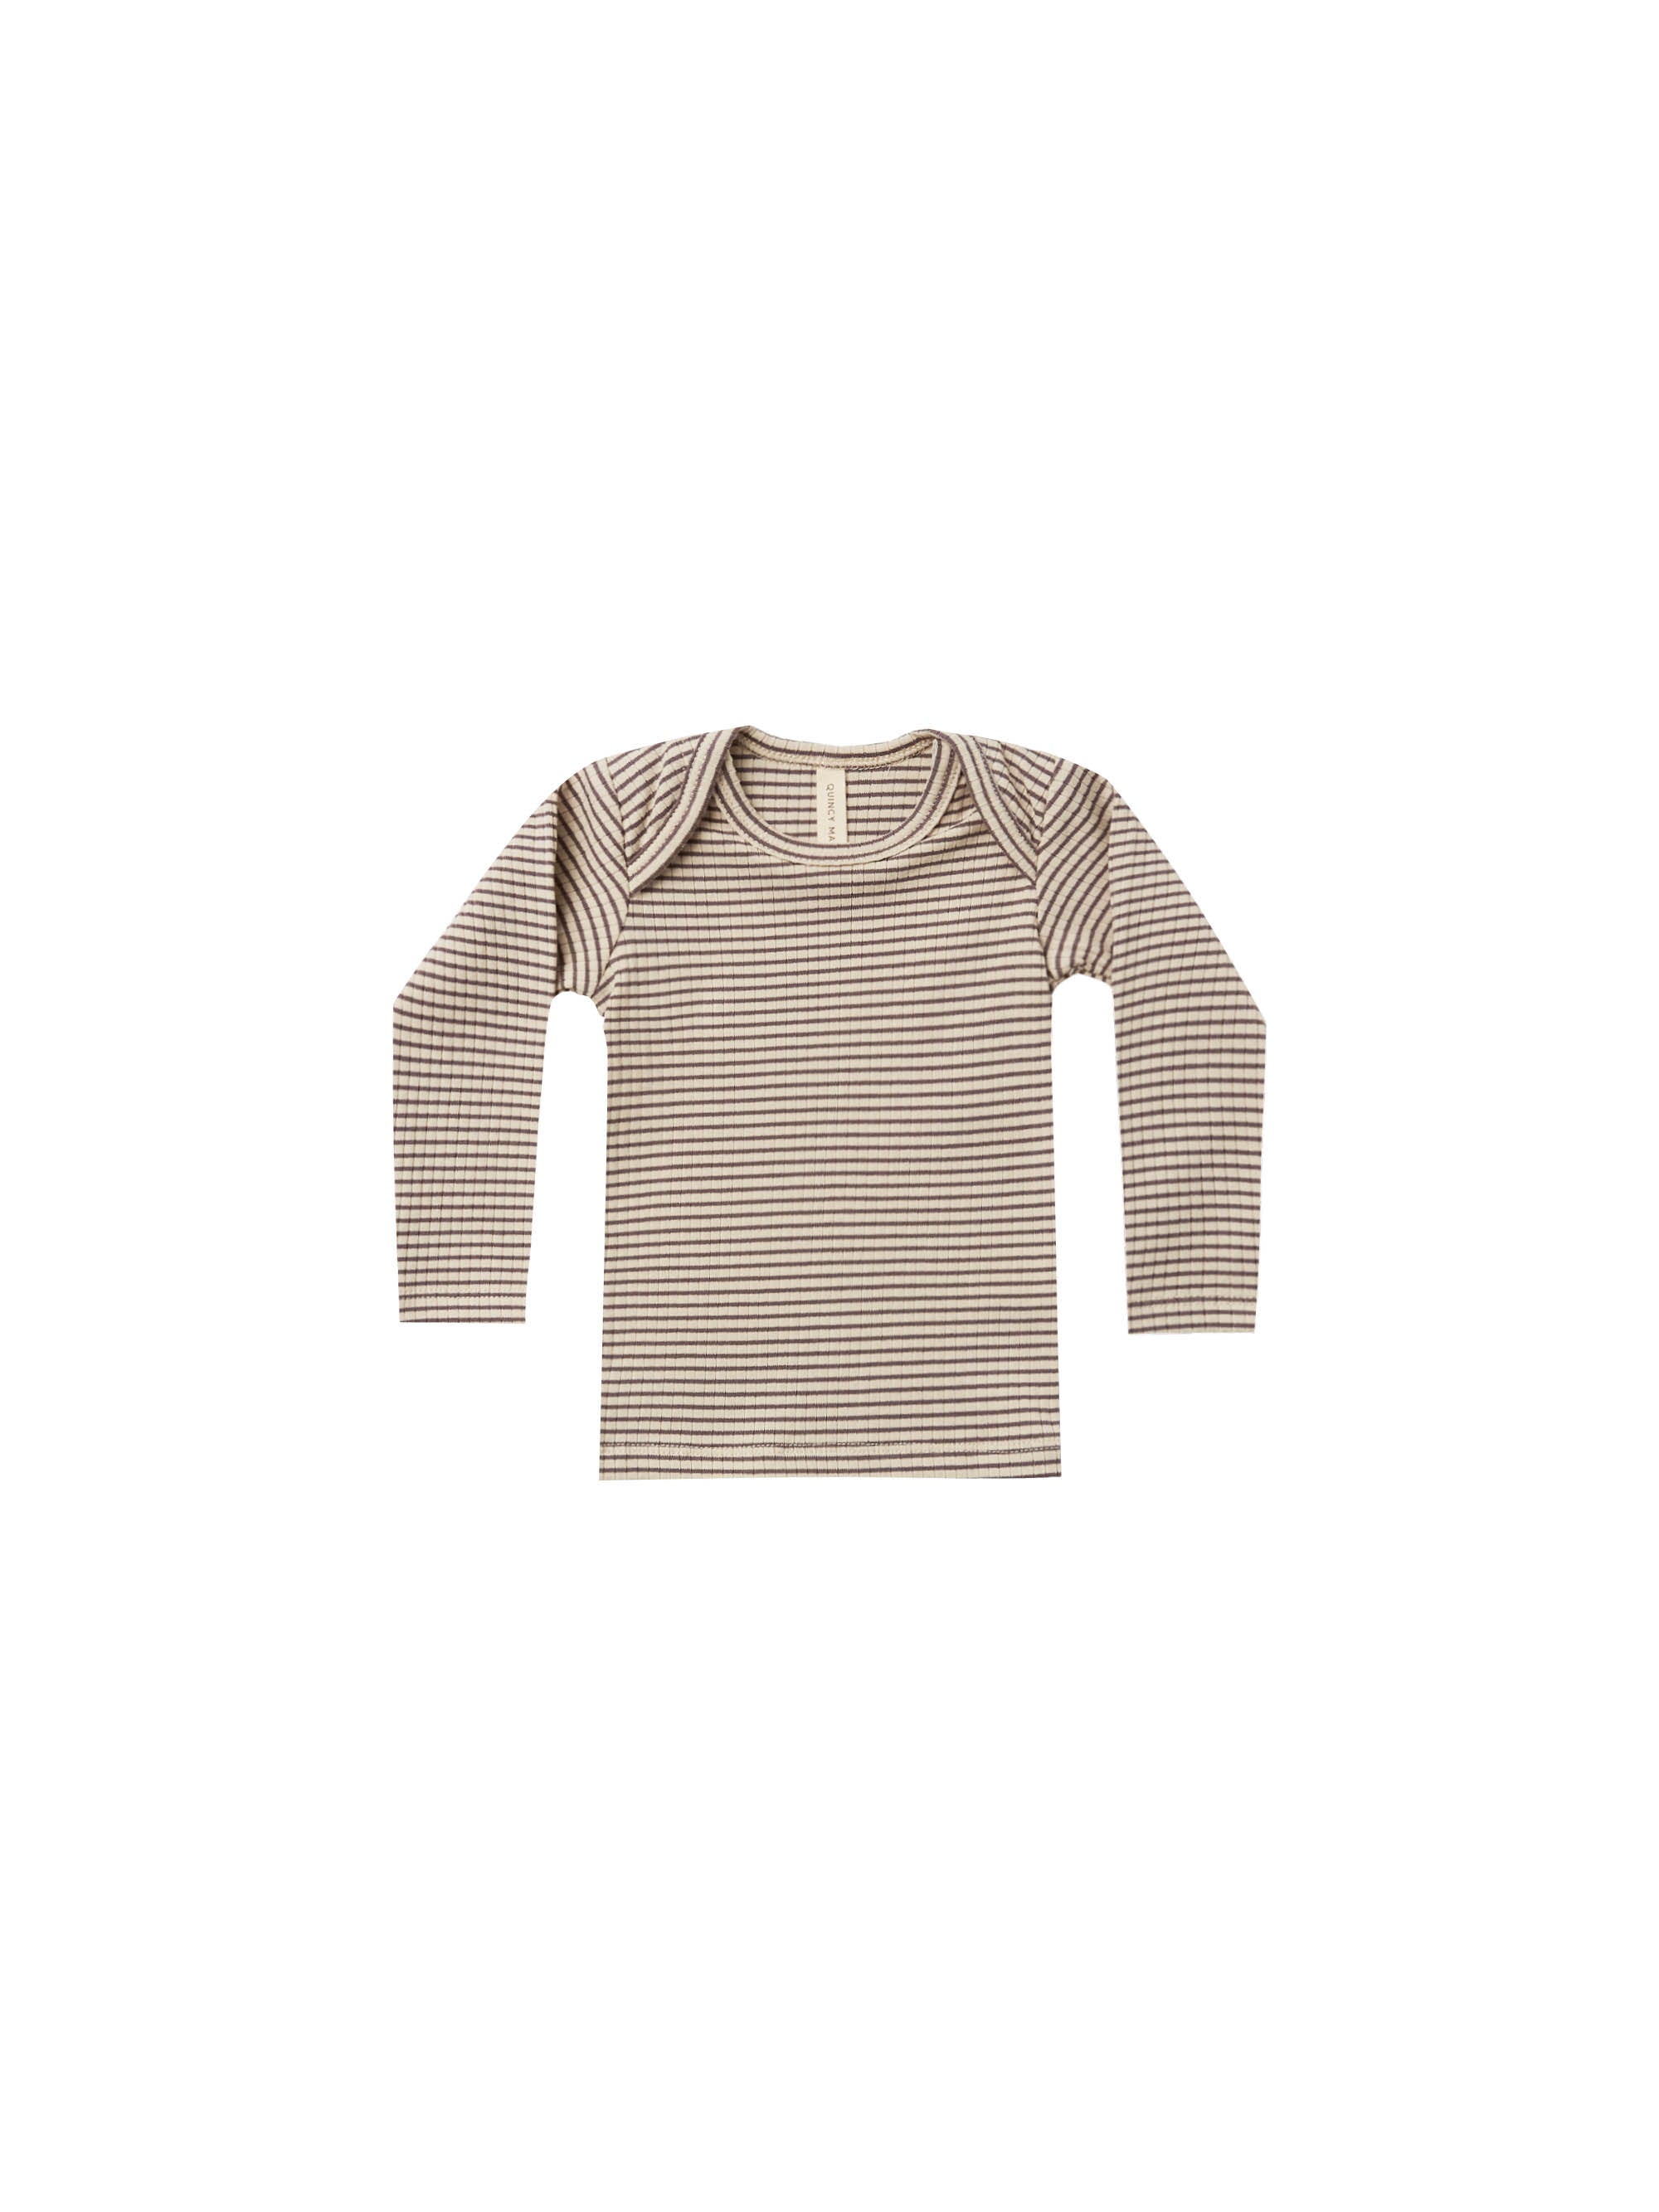 QUINCY MAE RIBBED LS LAP TEE / CHARCOAL STRIPE